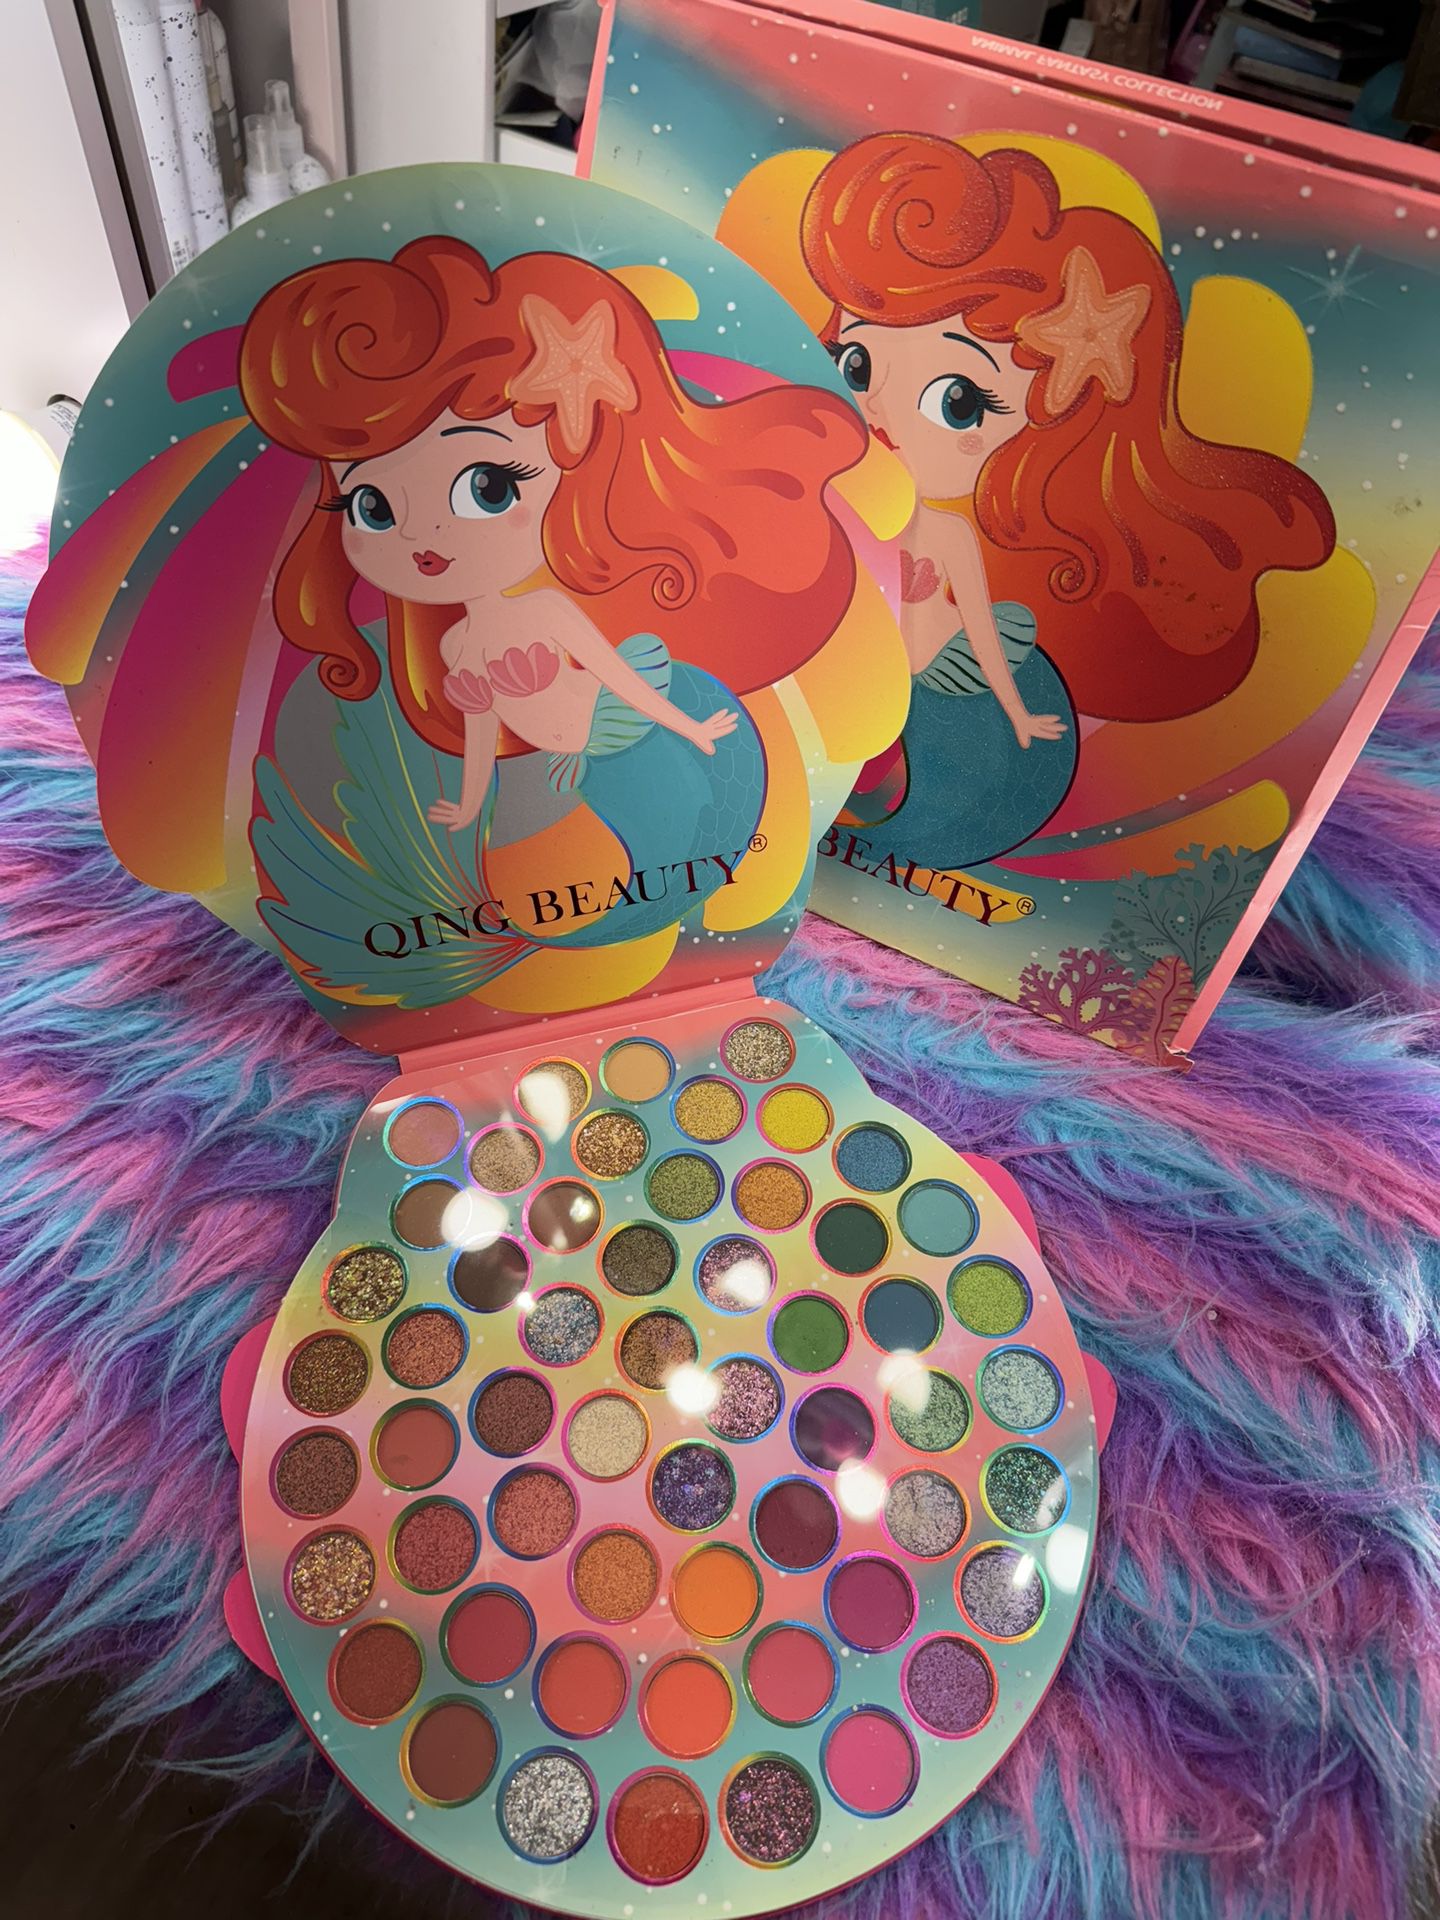 Little Mermaids 🧜‍♀️ Beautiful Eyeshadow Palette With Lots Of Pretty Glitter ✨ Colors Nice Colors 